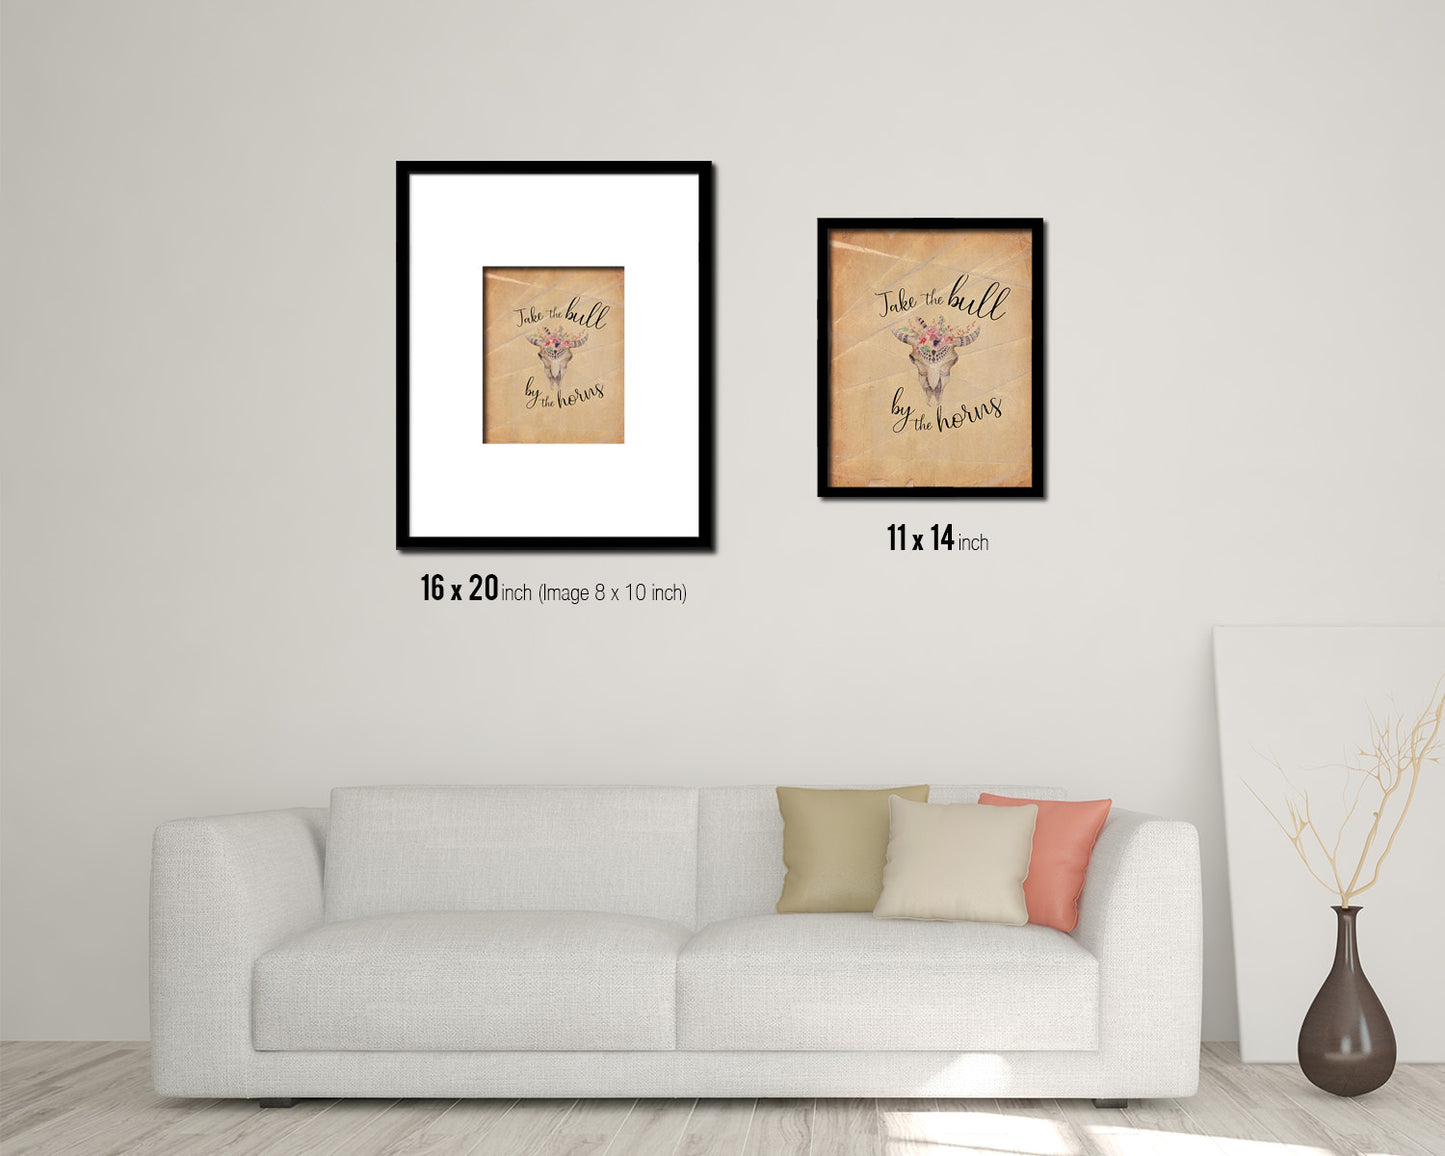 Take the bull by the horns Quote Paper Artwork Framed Print Wall Decor Art